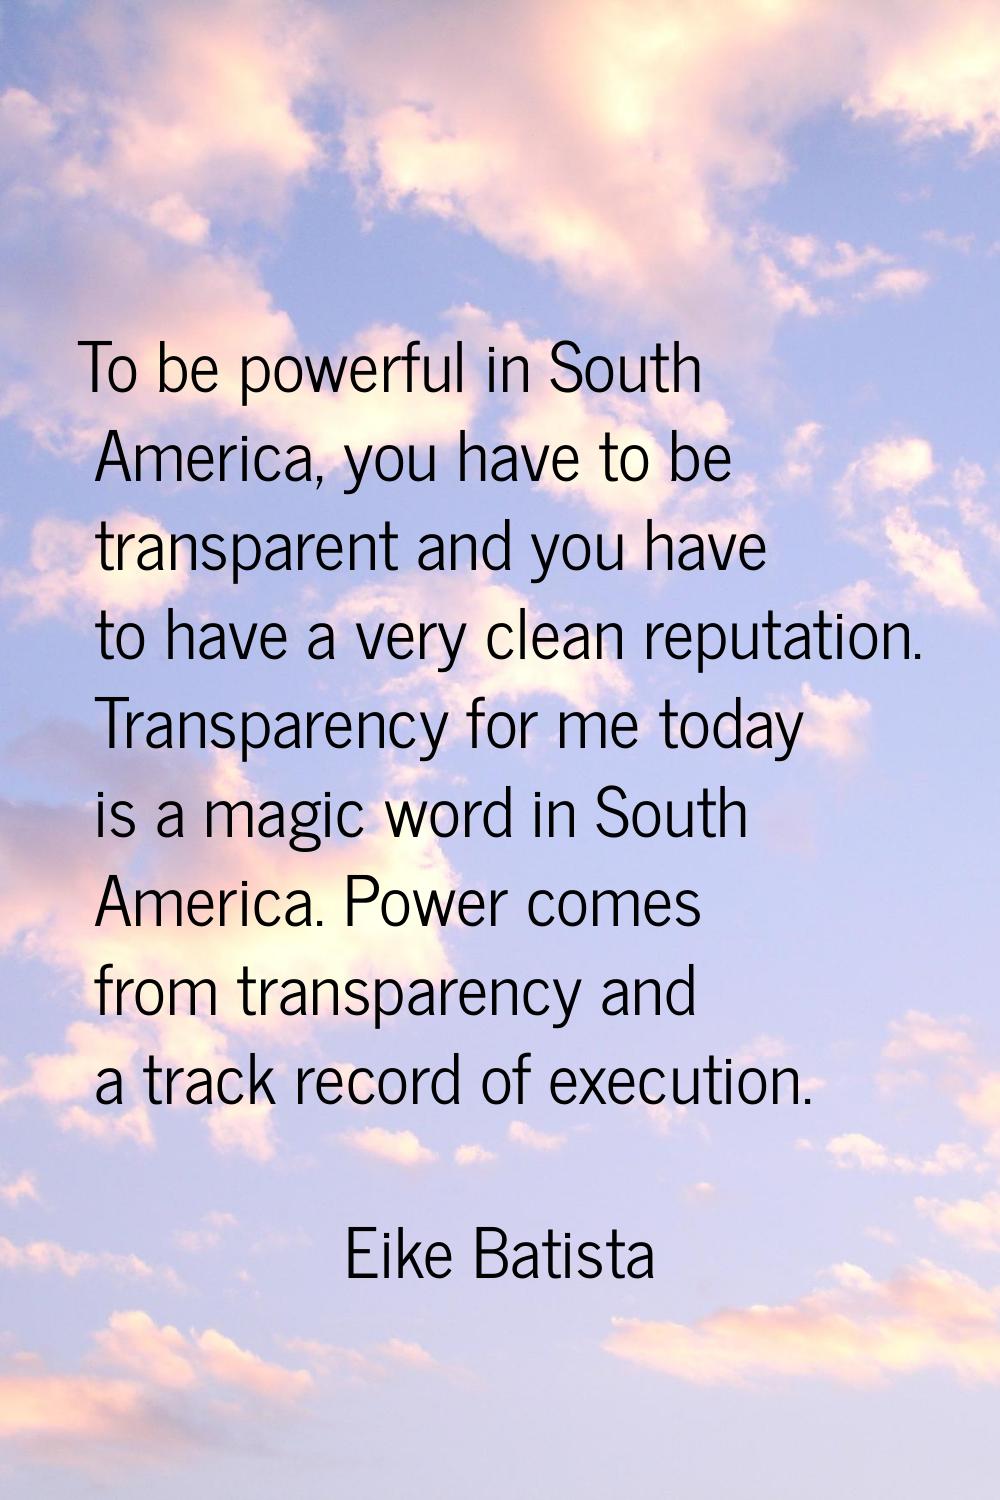 To be powerful in South America, you have to be transparent and you have to have a very clean reput